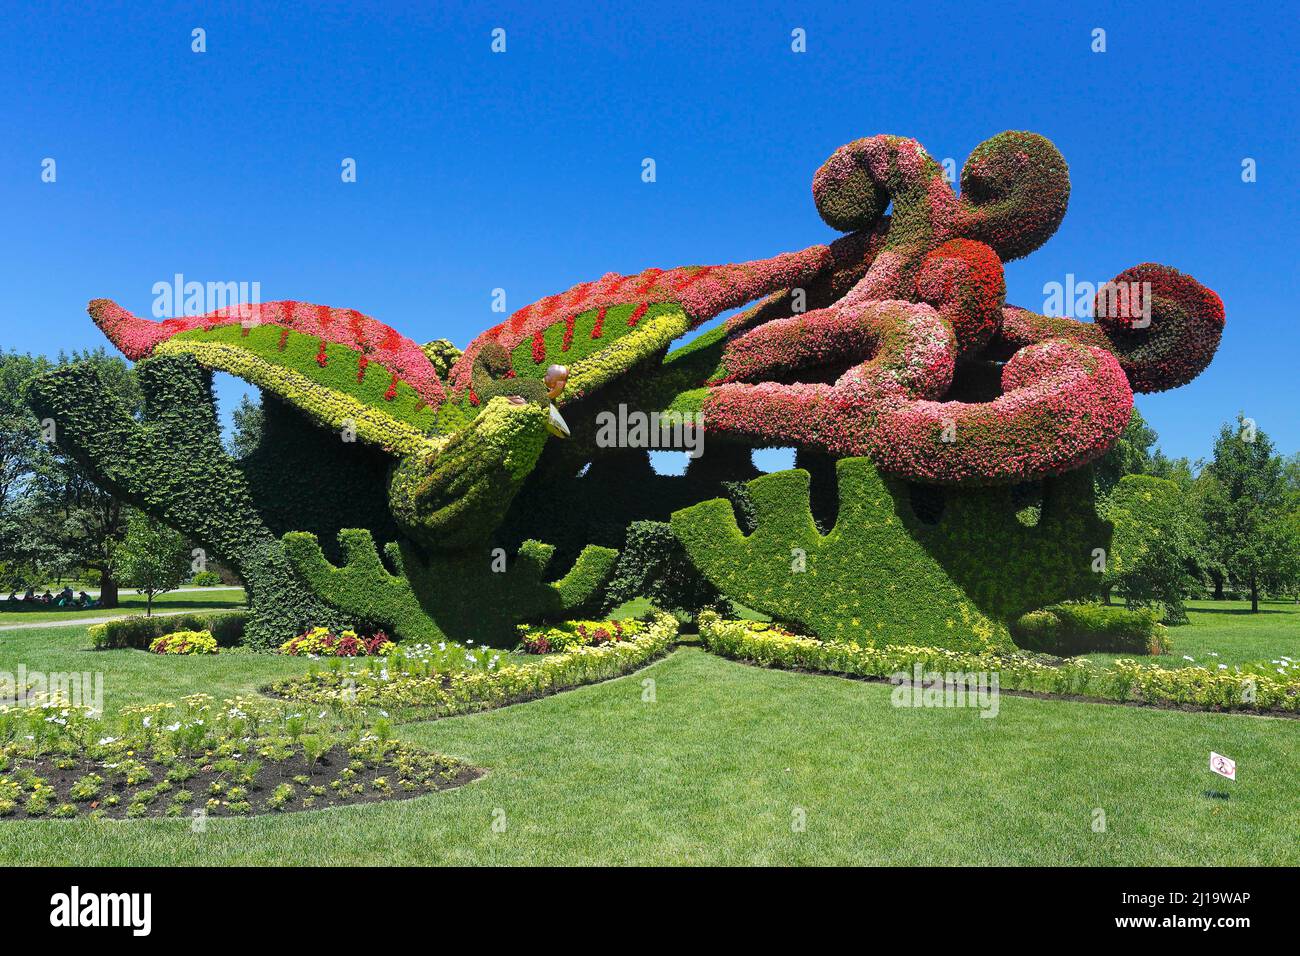 Plant sculpture, Horticulture, Botanical Garden, Montreal, Province of Quebec, Canada Stock Photo